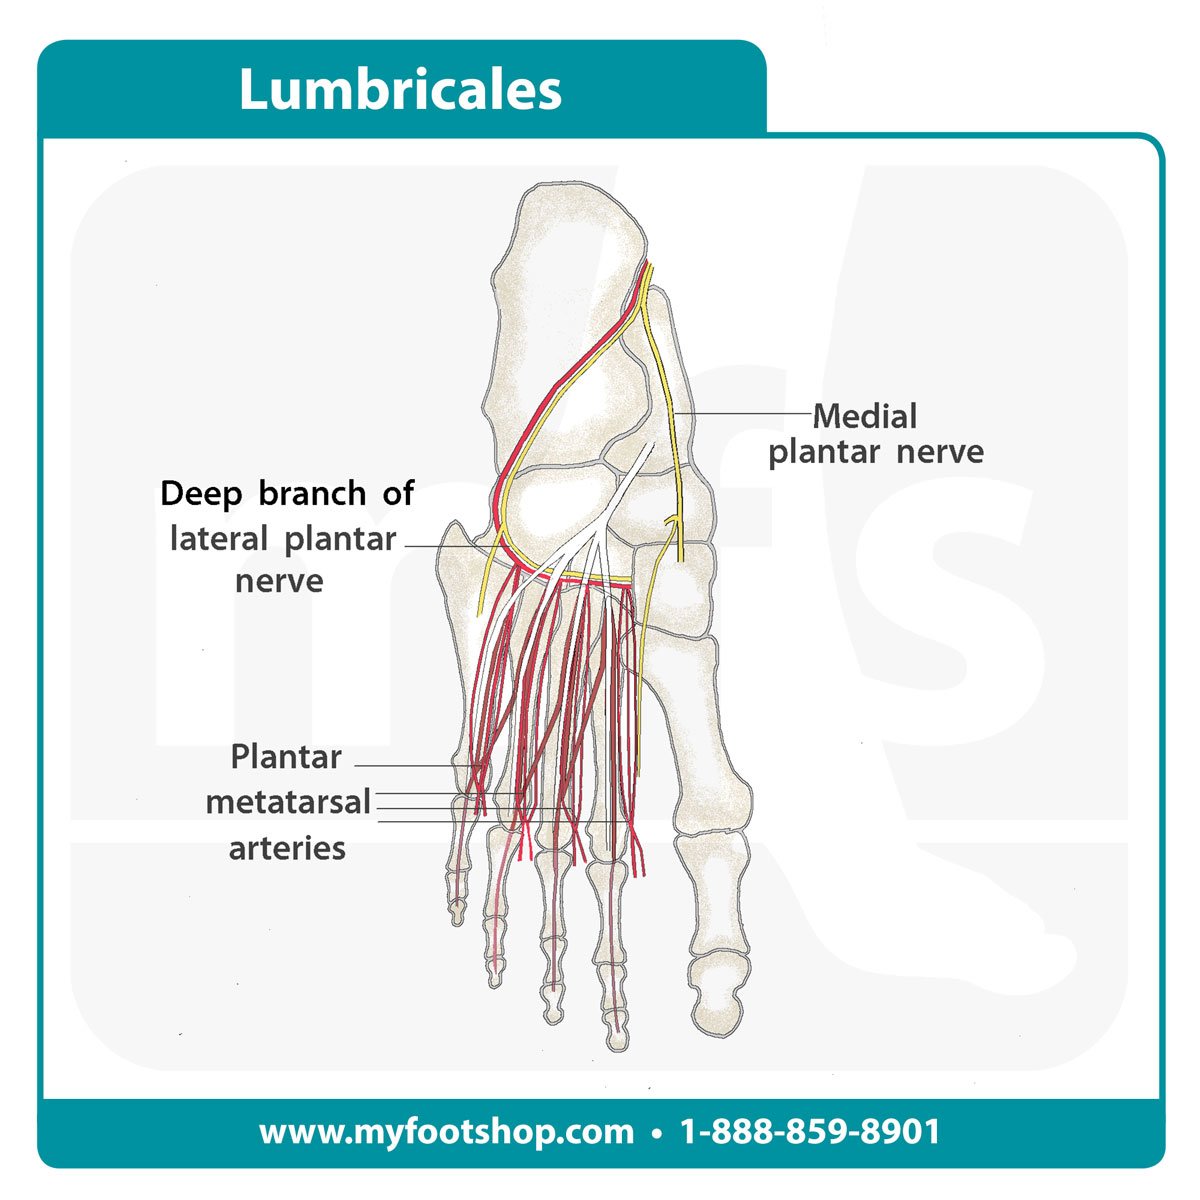 image of the lumbricale muscles of the foot